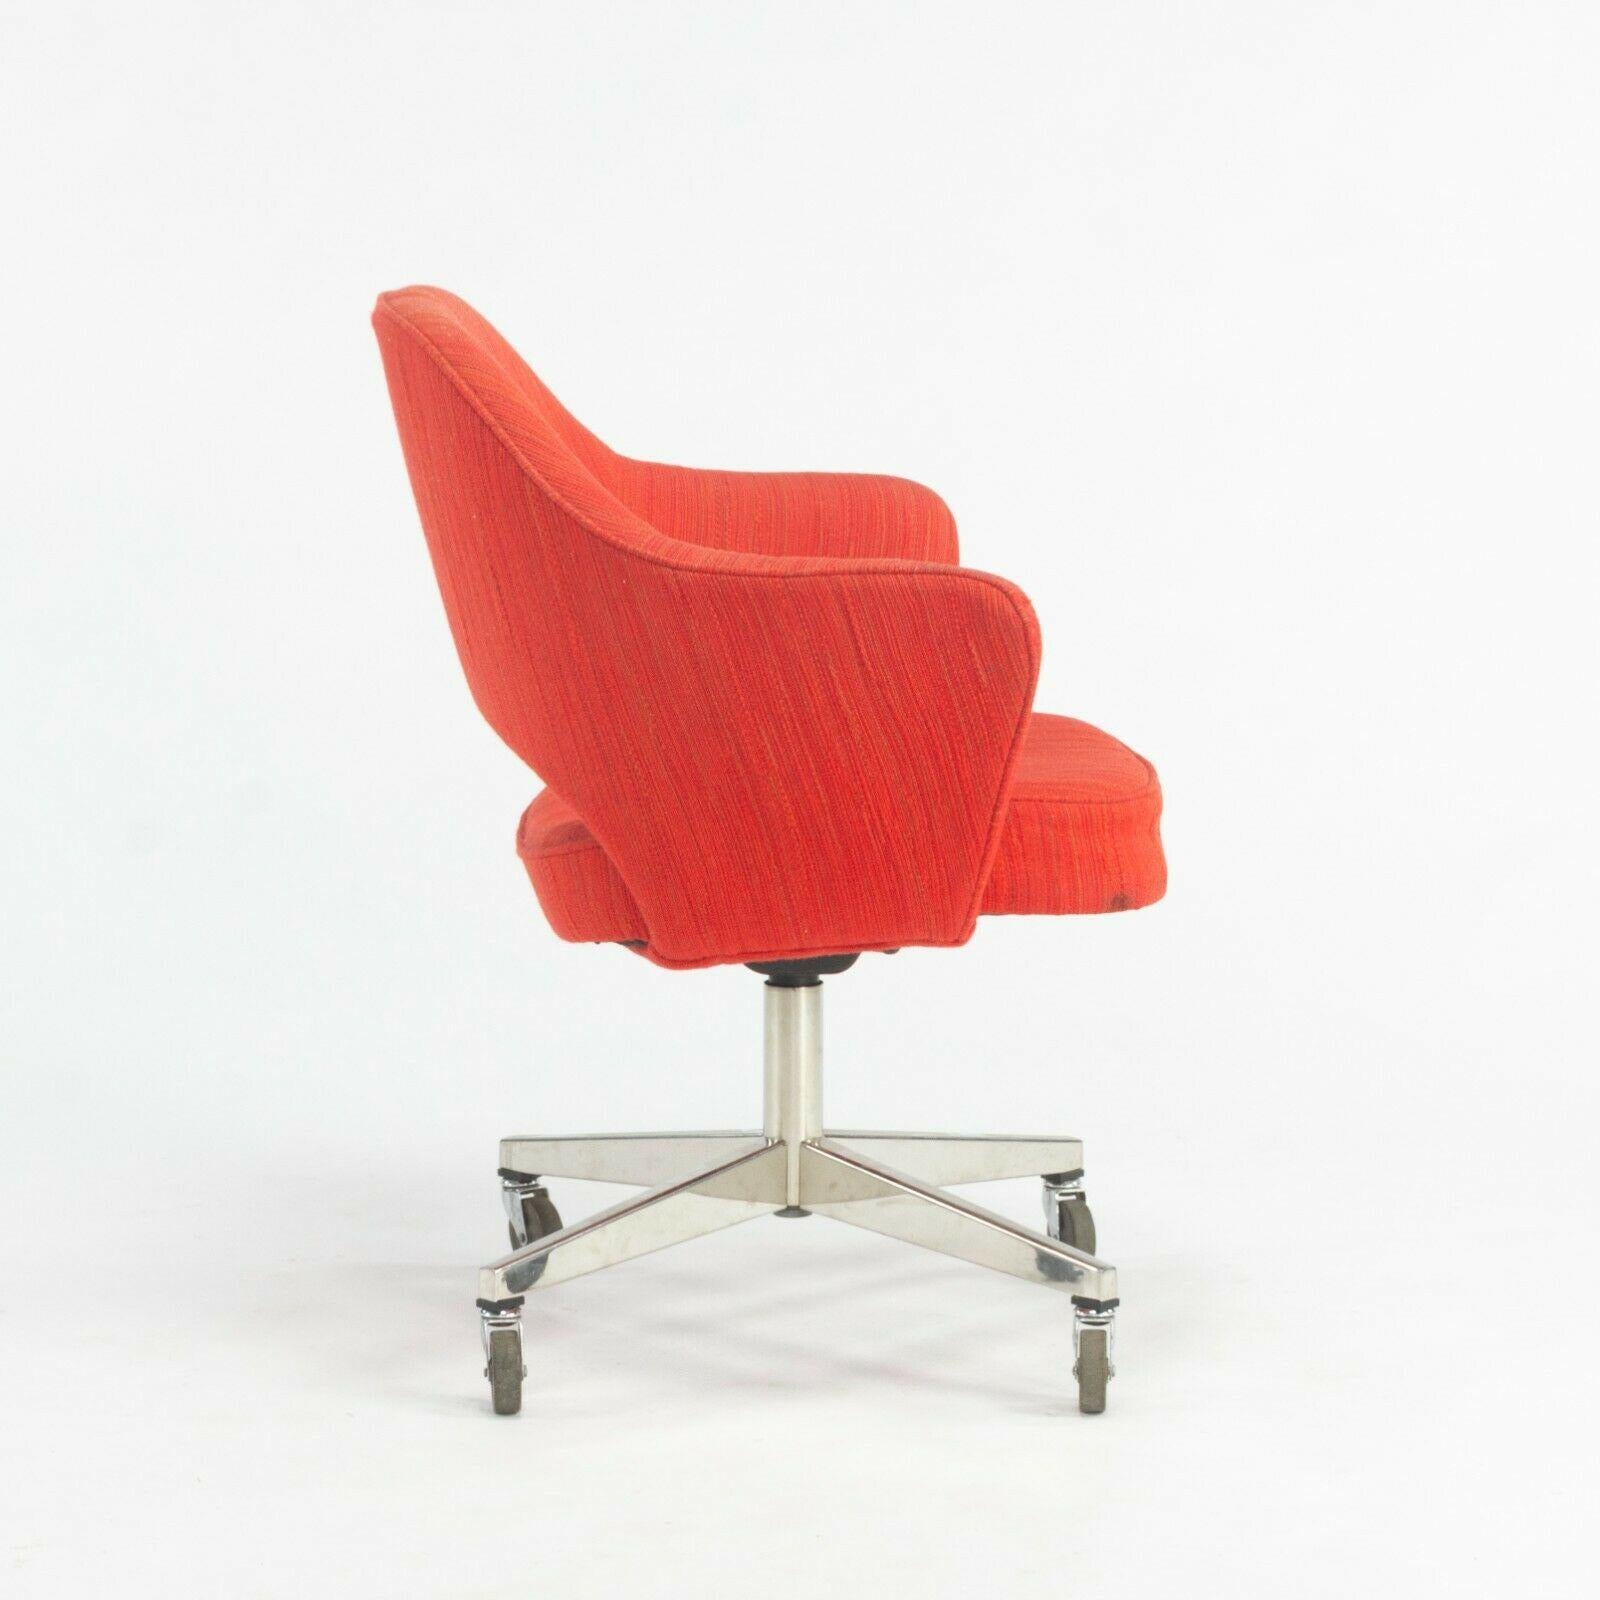 American 1974 Eero Saarinen for Knoll Rolling Executive Office Chairs Original Red Fabric For Sale